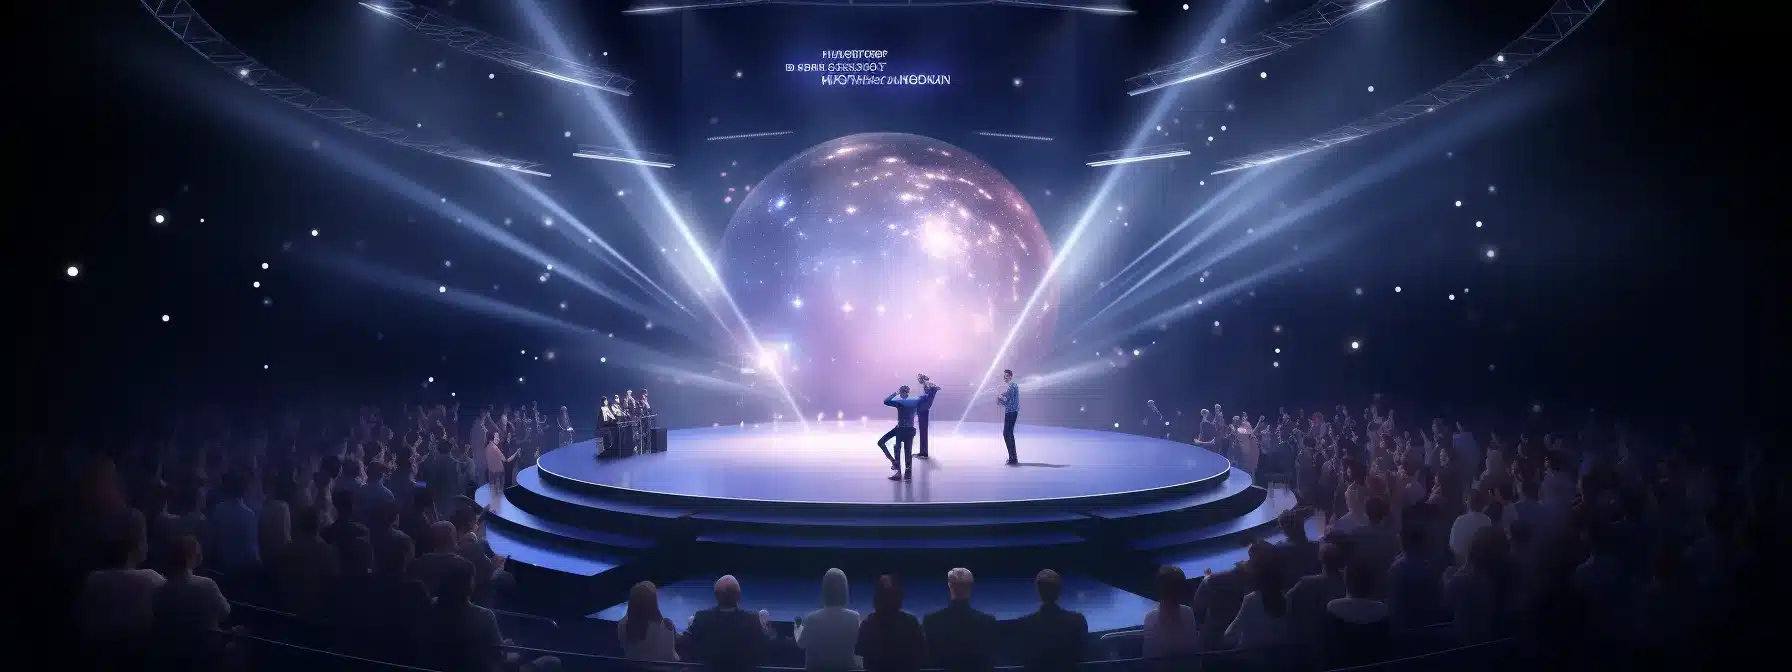 A Cosmic Stage With A Brand Protagonist In The Spotlight, Surrounded By Diverse Audience Segments, Showcasing A Harmonious Marketing Symphony.